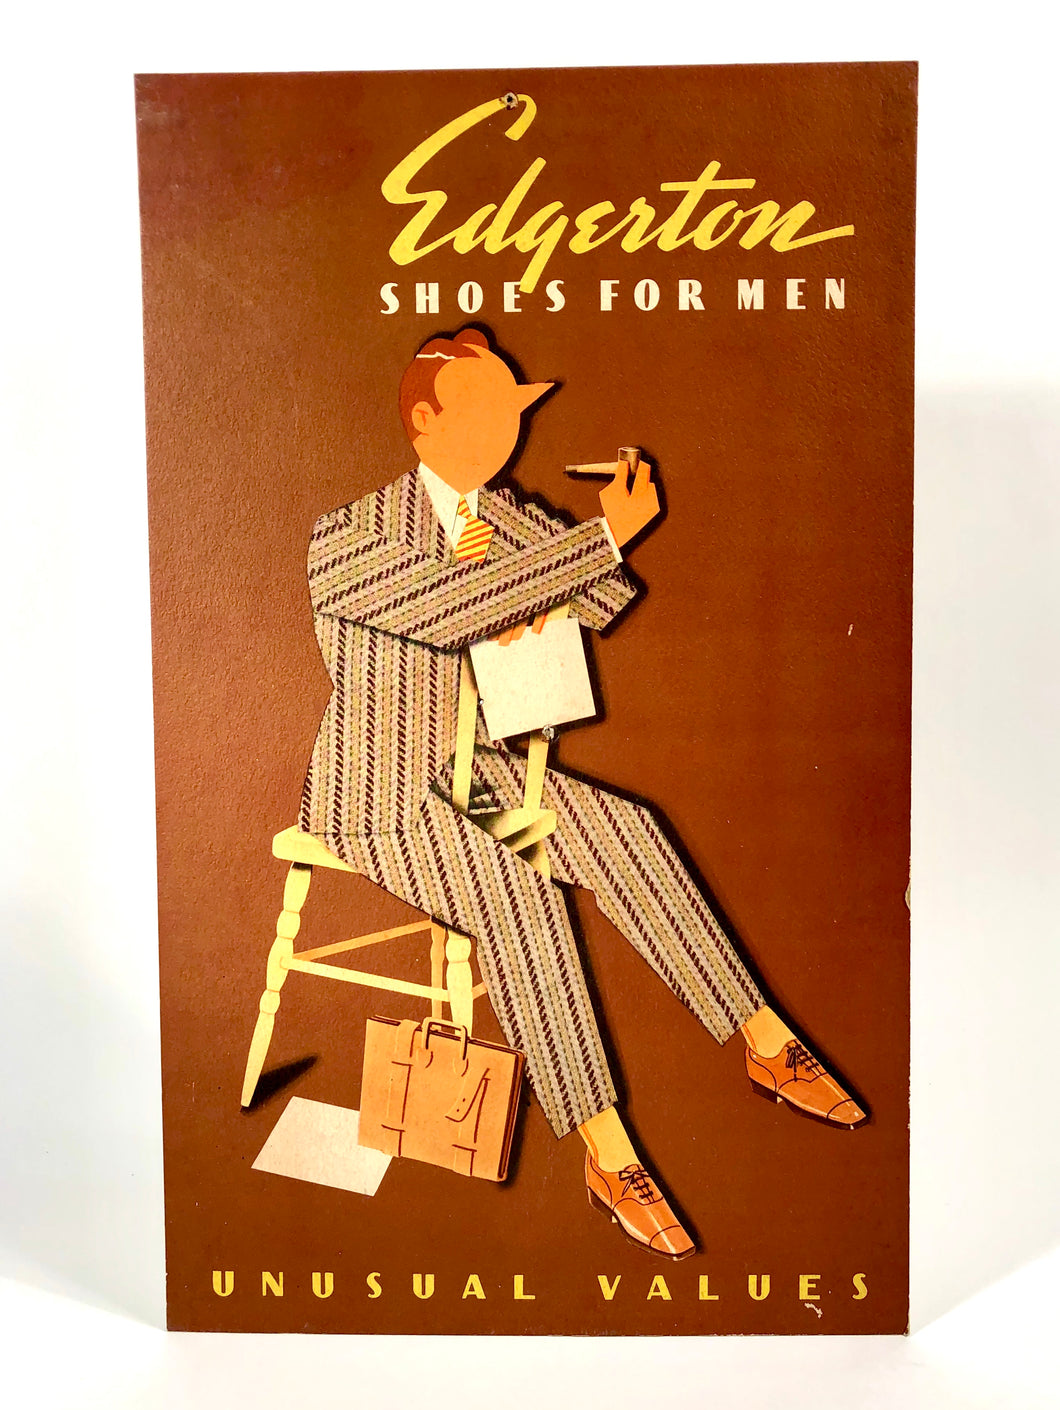 1940's EDGERTON SHOES for Men Stand-up Advertising Sign